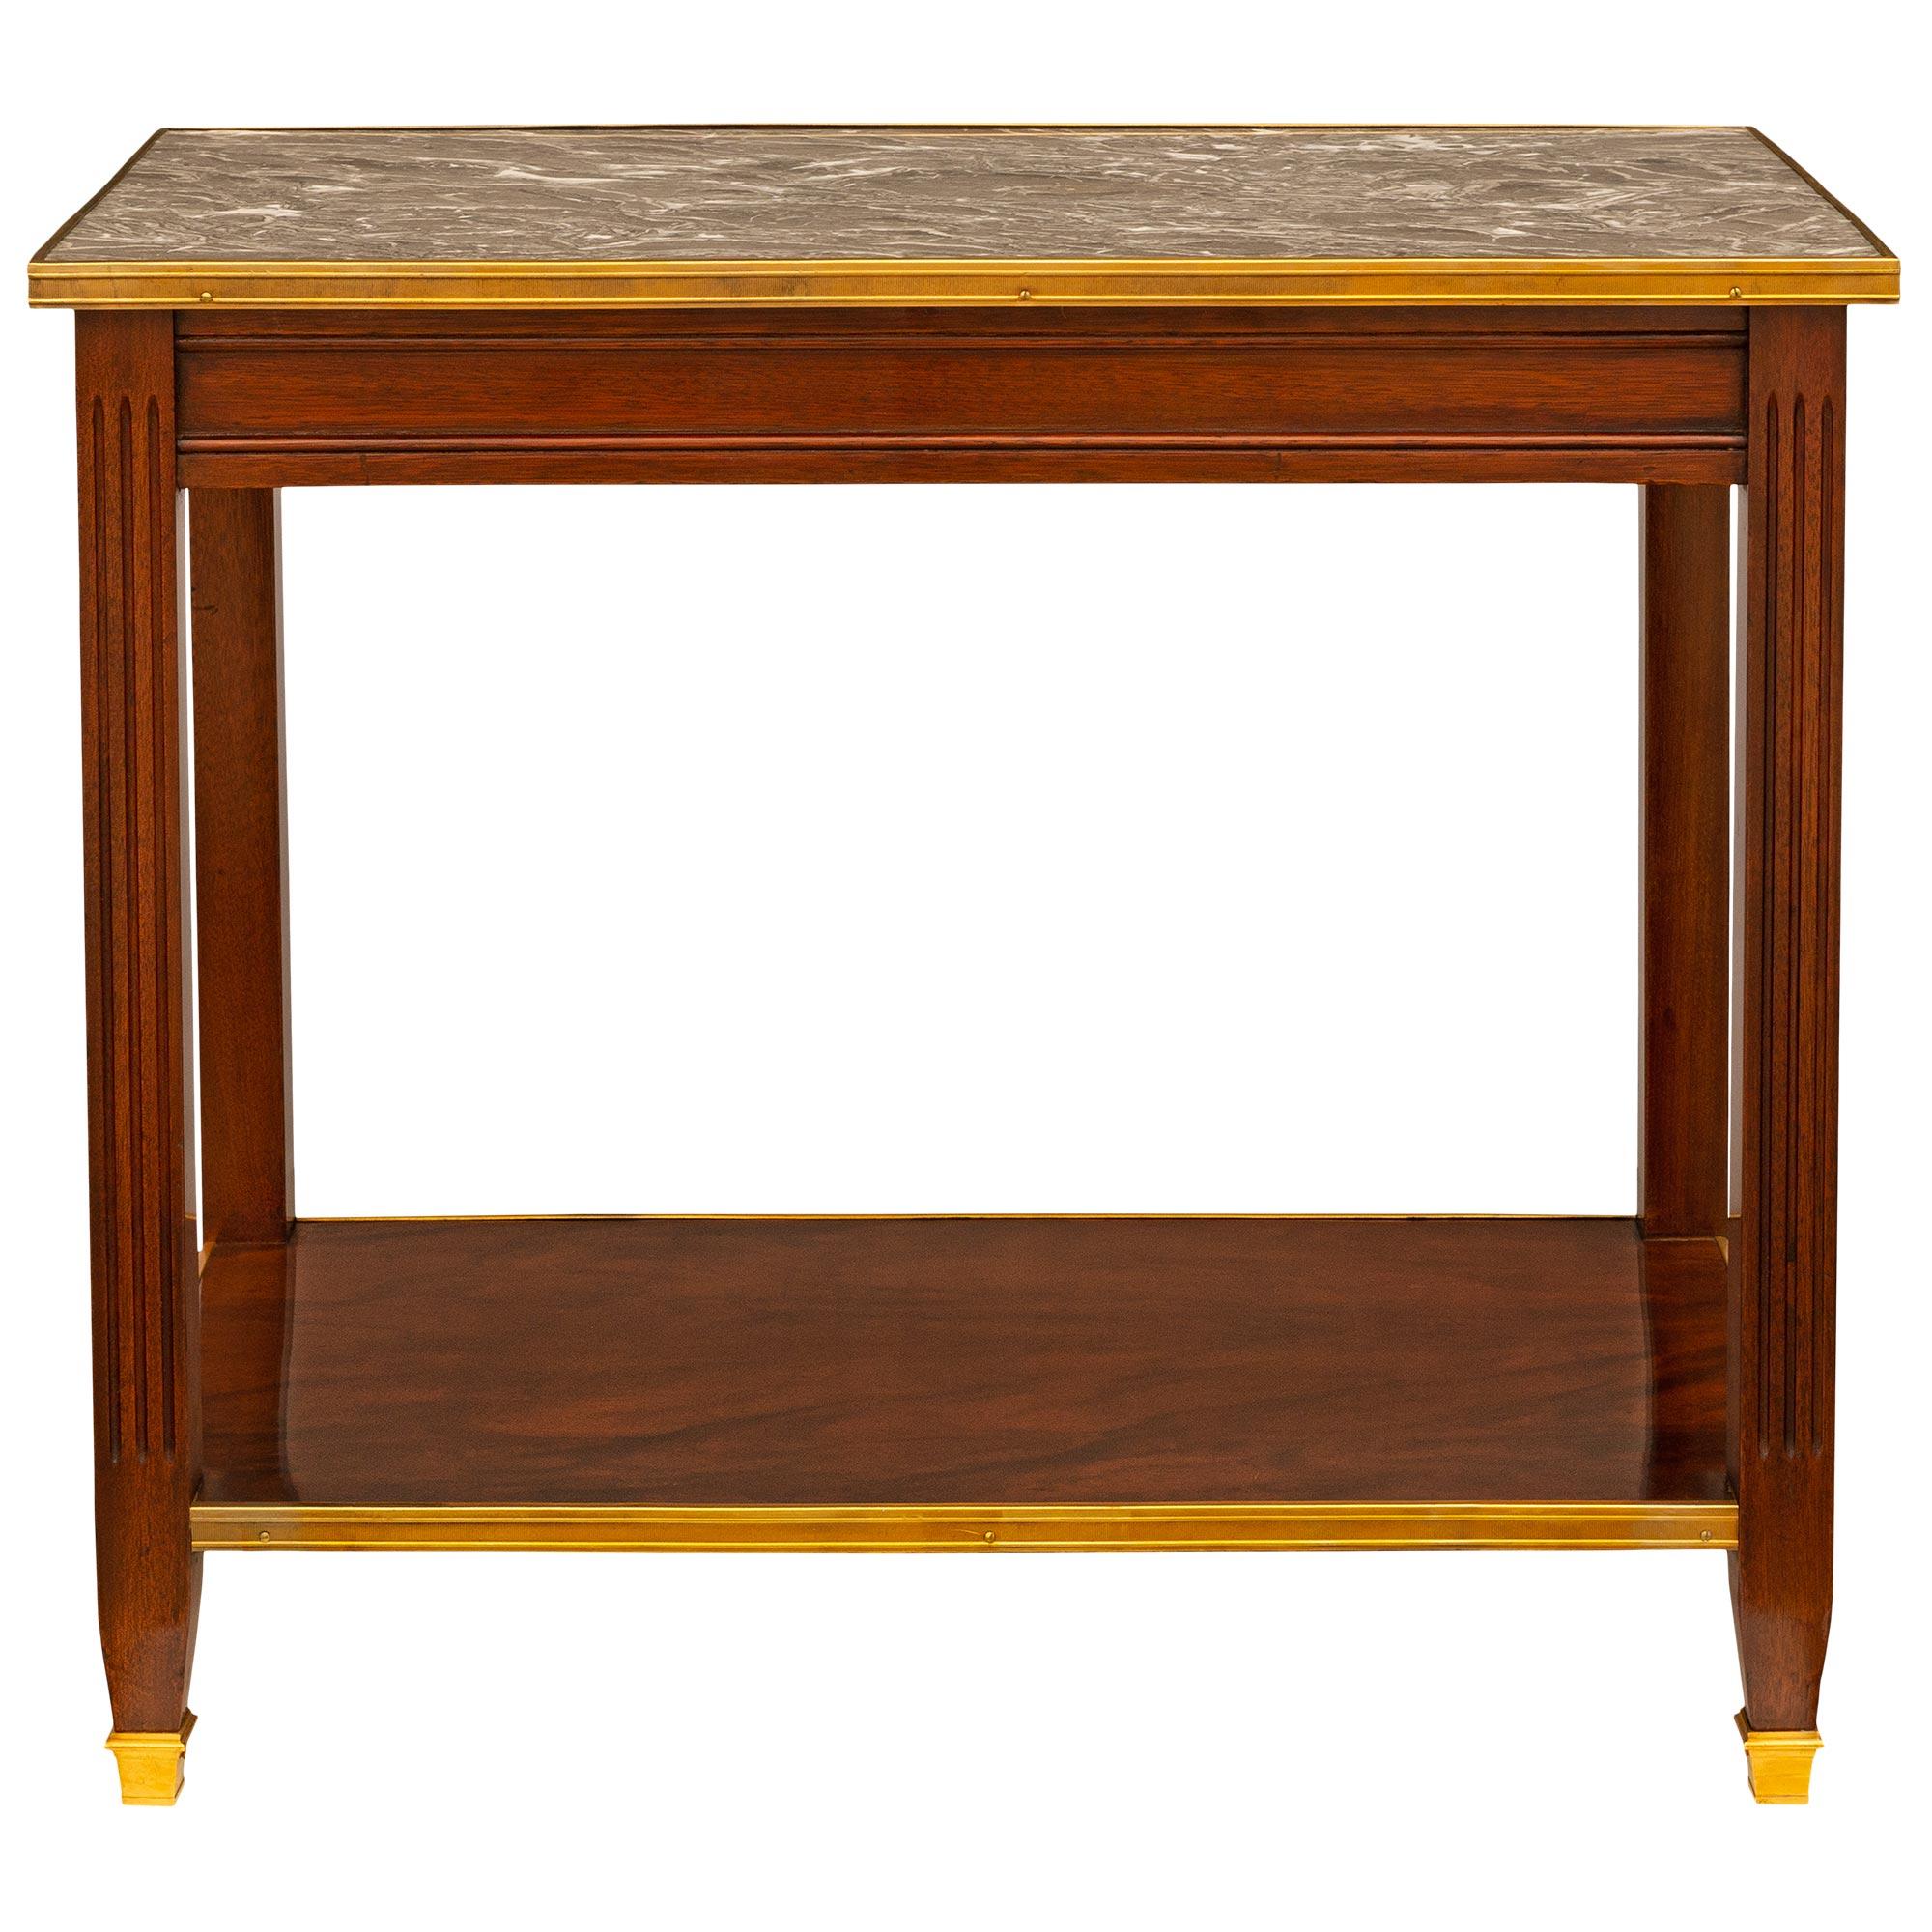 French Mid-19th Century Louis XVI Style Mahogany Low Rectangular Table For Sale 4